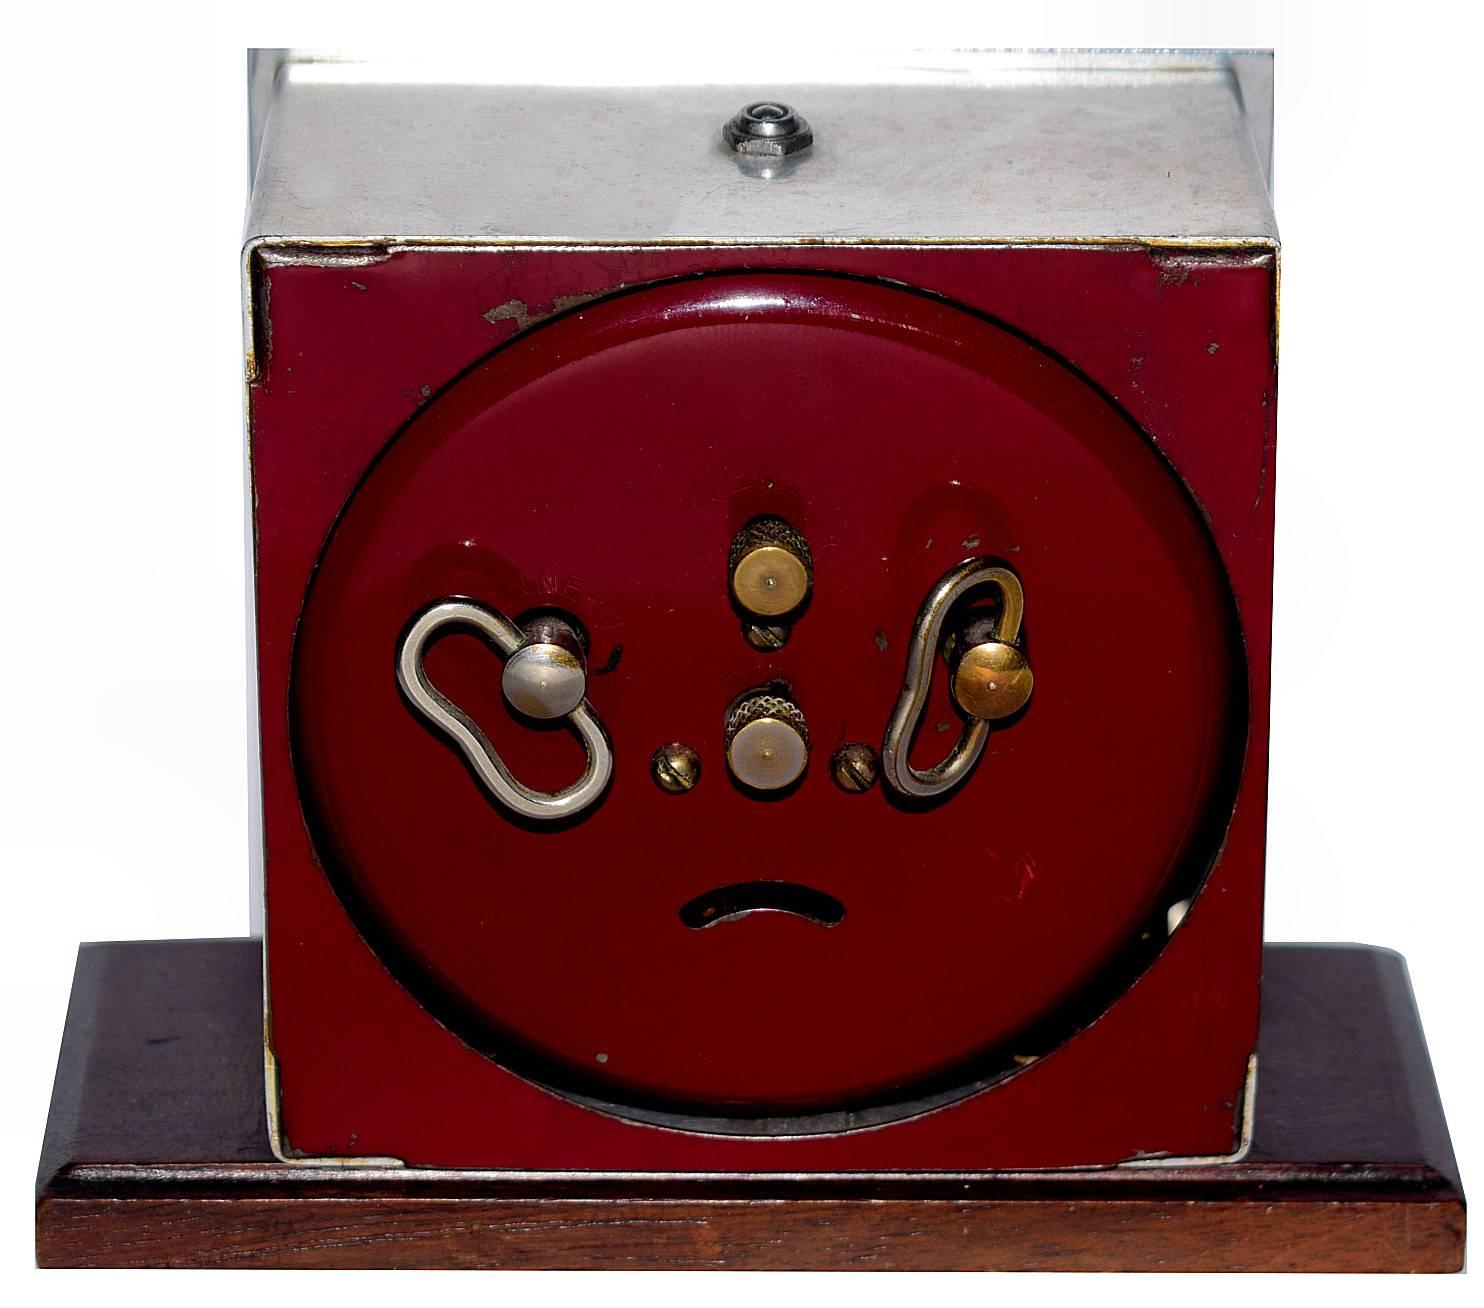 One of my personal favourite makers of French clocks is this clock by Blangy. The stylized numerals are the epitome of Art Deco. The whole body of the clock is chrome which rests on a Mahogany plinth and has a burgundy colored back cover.
The dial